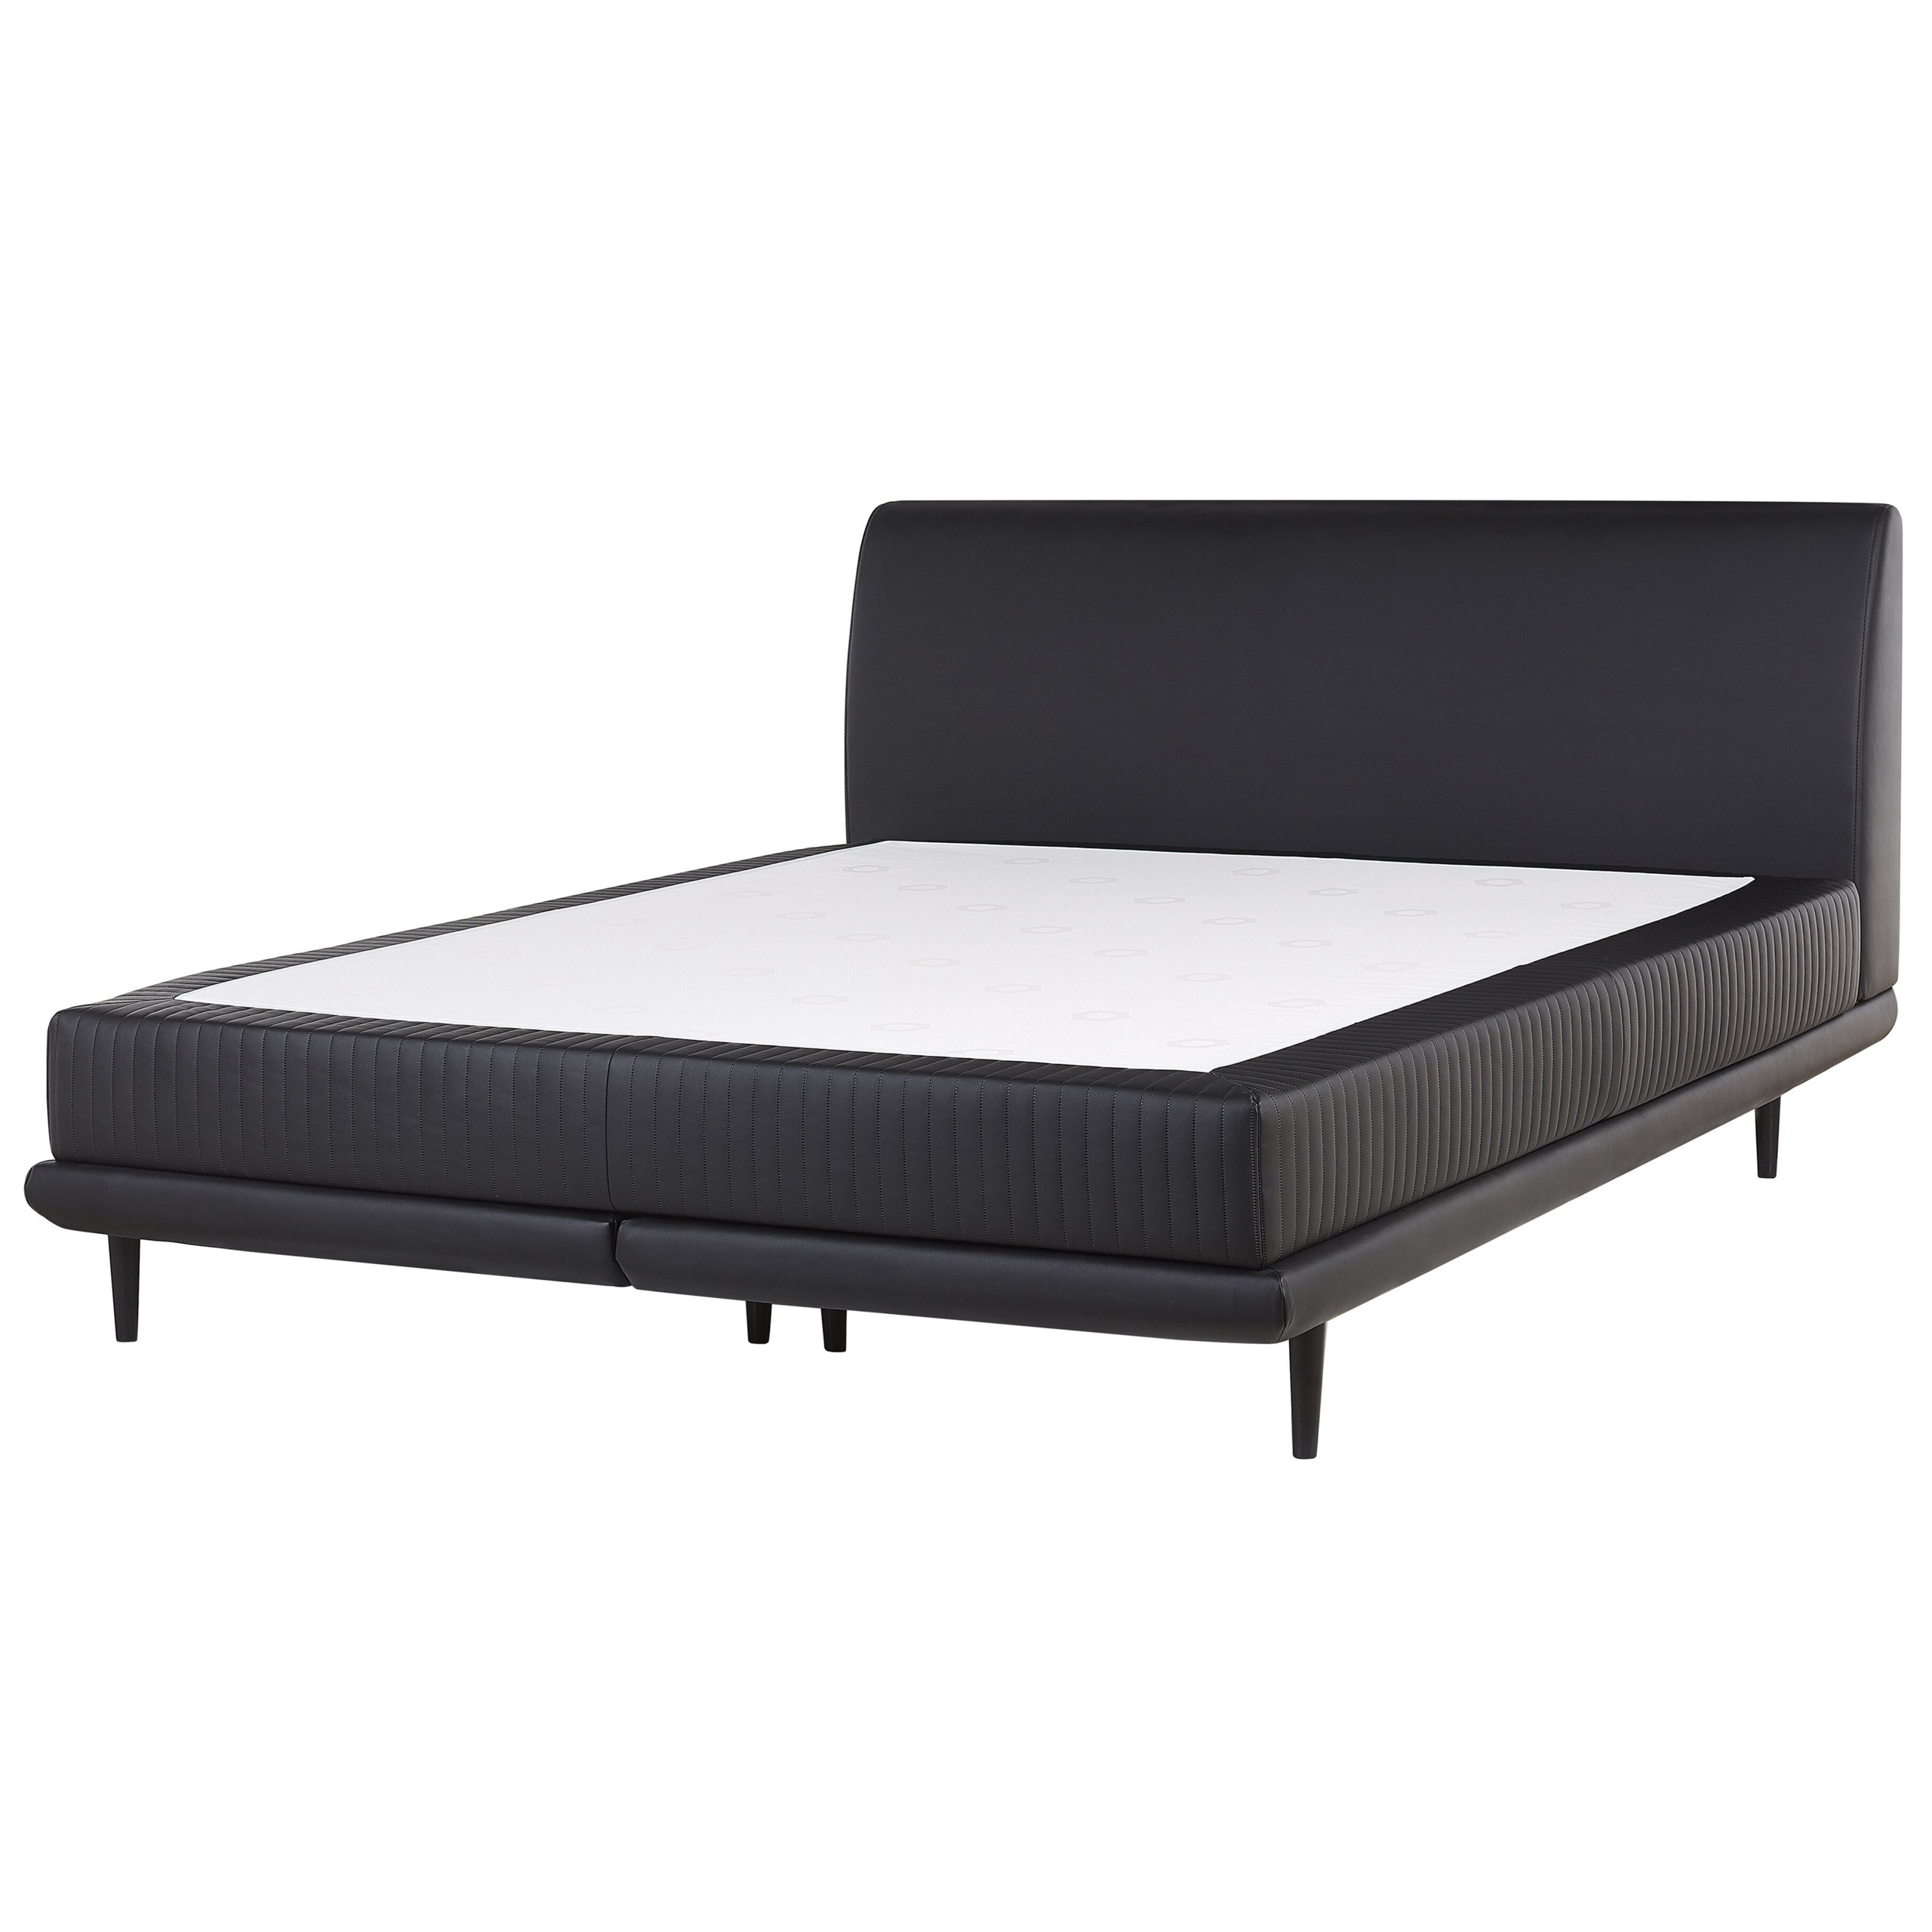 Beliani EU Super King Size Continental Divan Bed 6ft Black Faux Leather with Zigzag Spring Mattress and Topper